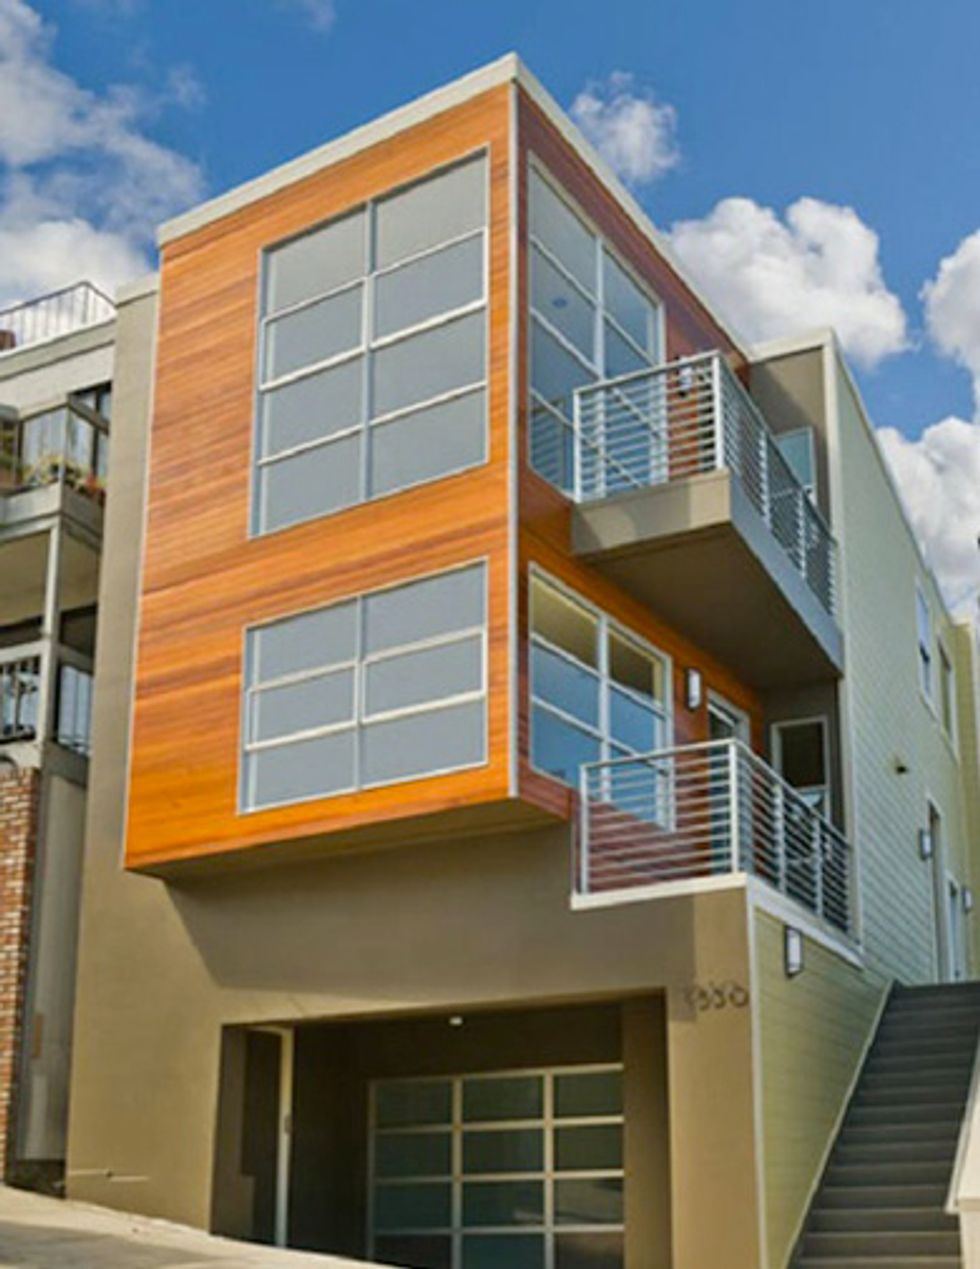 Real Estate Report: Family-Sized Condo For Grown-up Hipsters in Bernal Heights, $895K